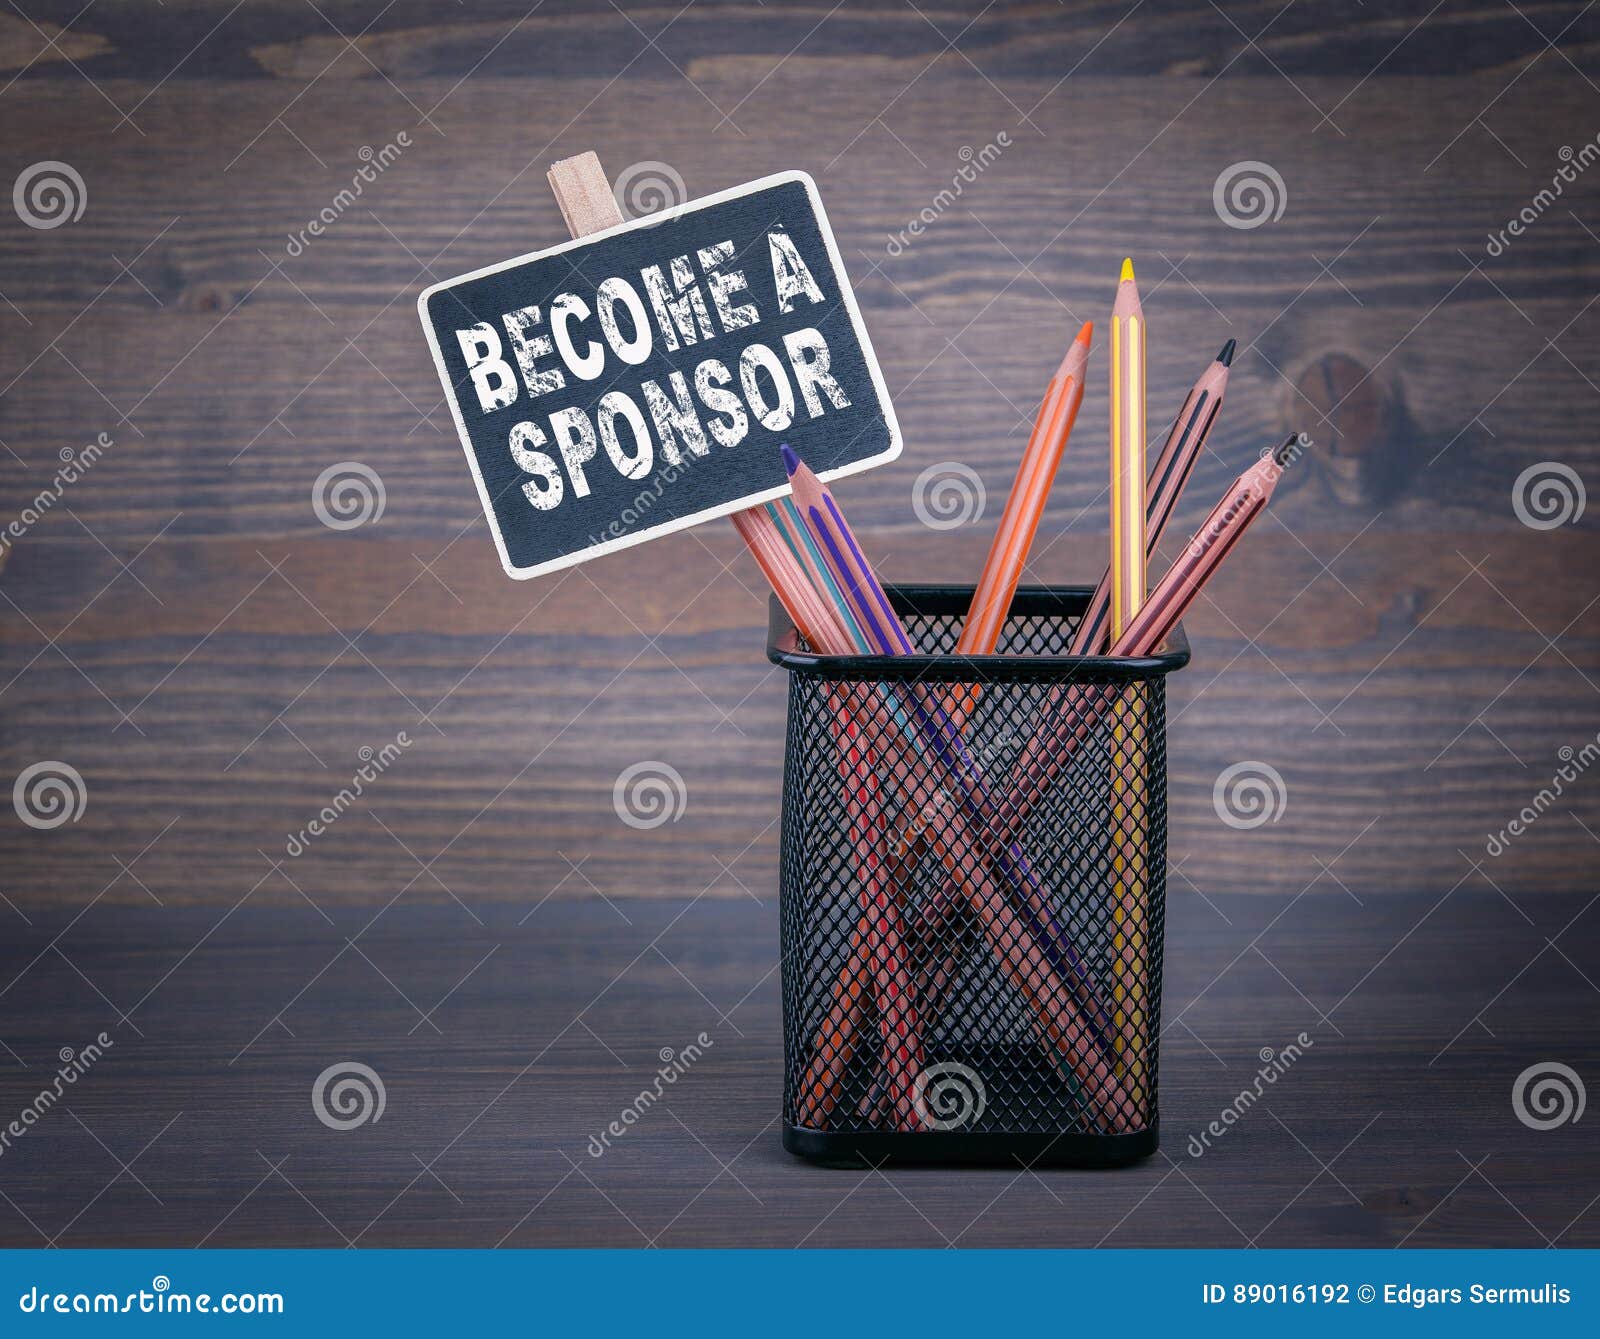 become a sponsor. a small blackboard chalk and colored pencil on wood background